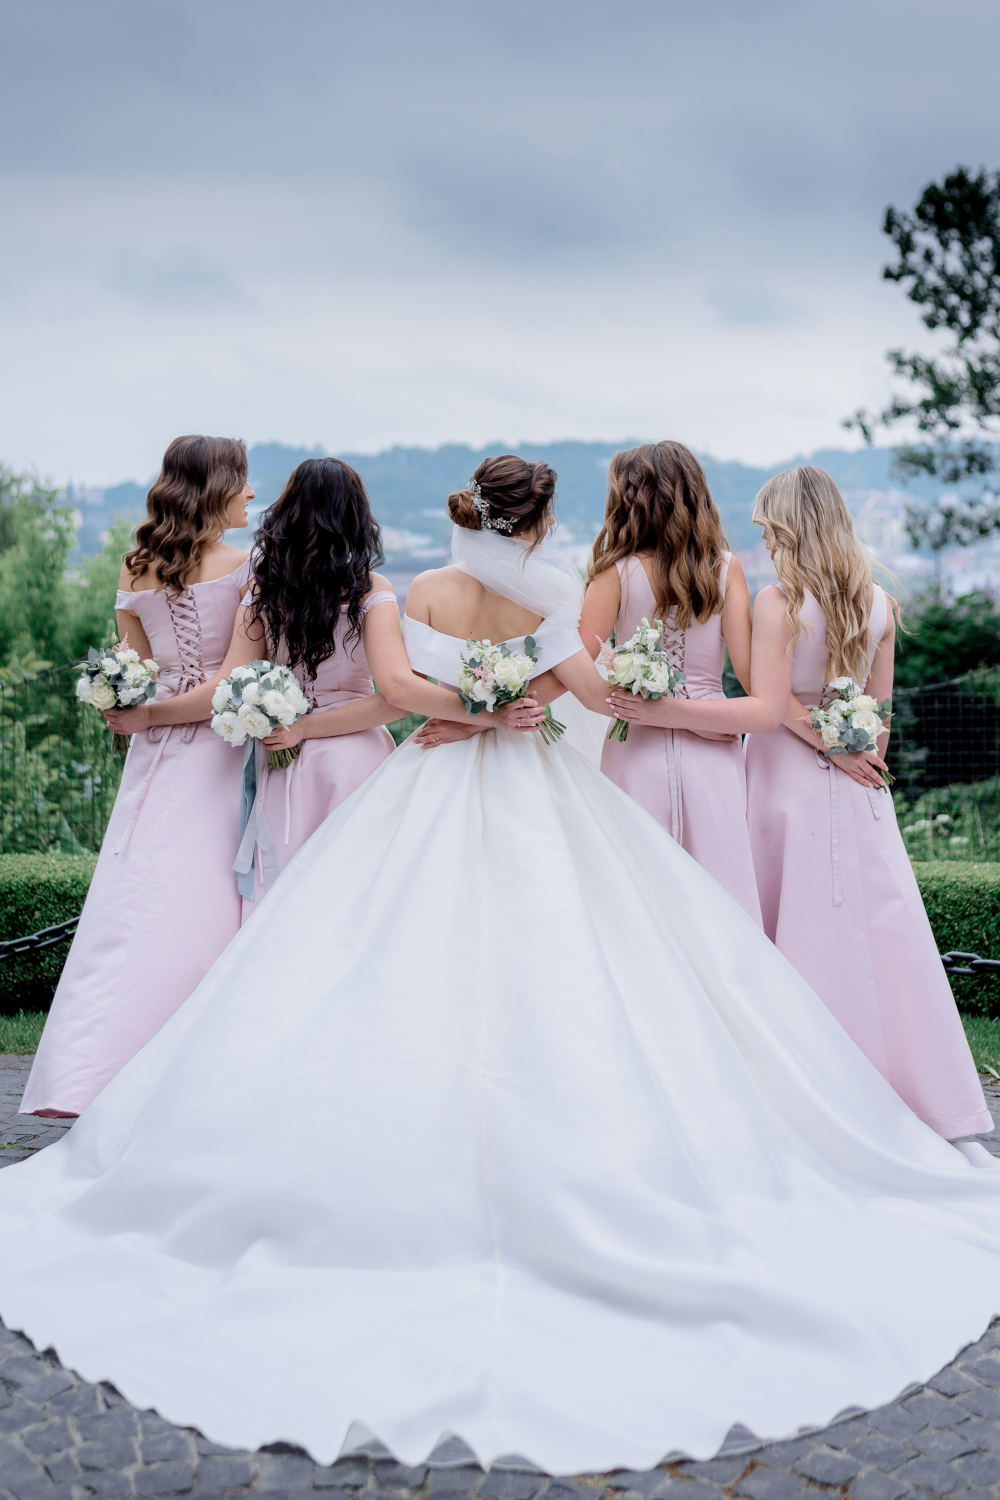 Back view of bride in wedding dress and bridesmaids dressed